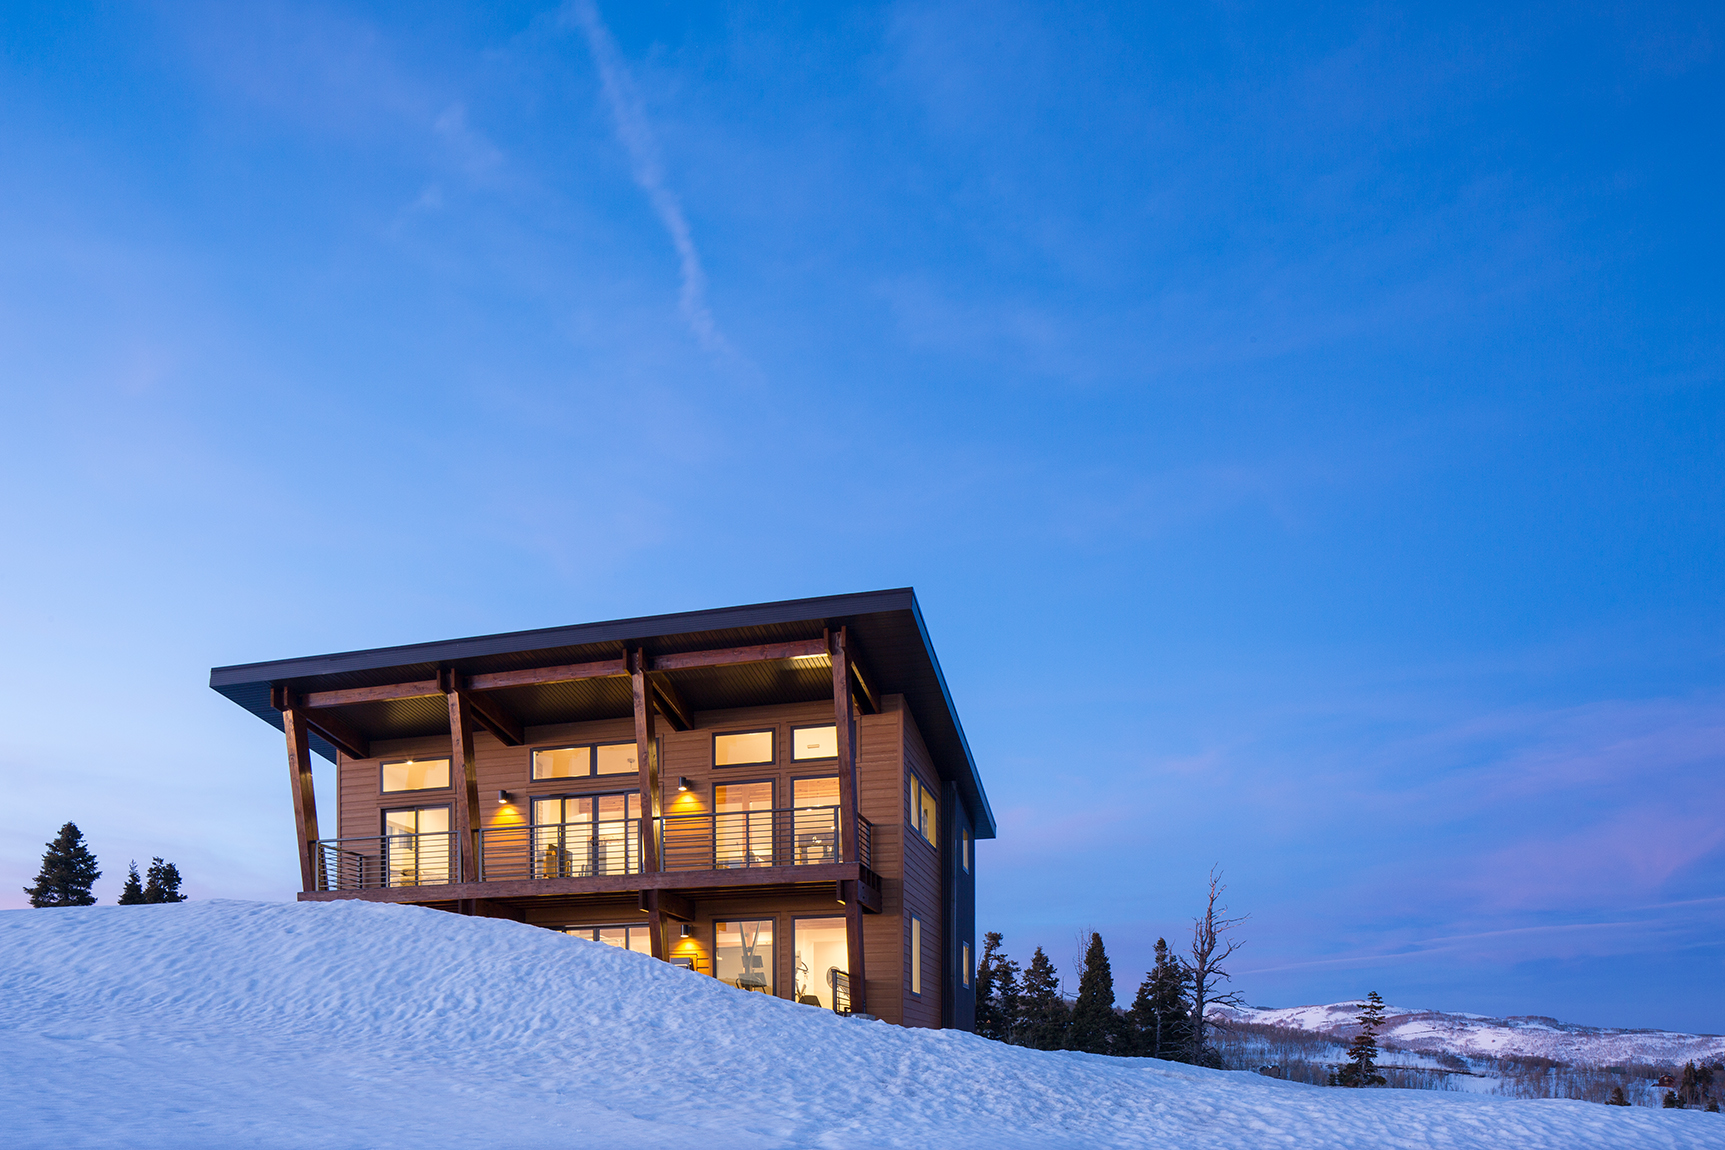 Modern home set high on top of a mountain surrounded by trees and a snow covered meadow. The photograph was taken at dusk so the clouds are oink, the skies are blue and a warm glow is radiating from the windows.